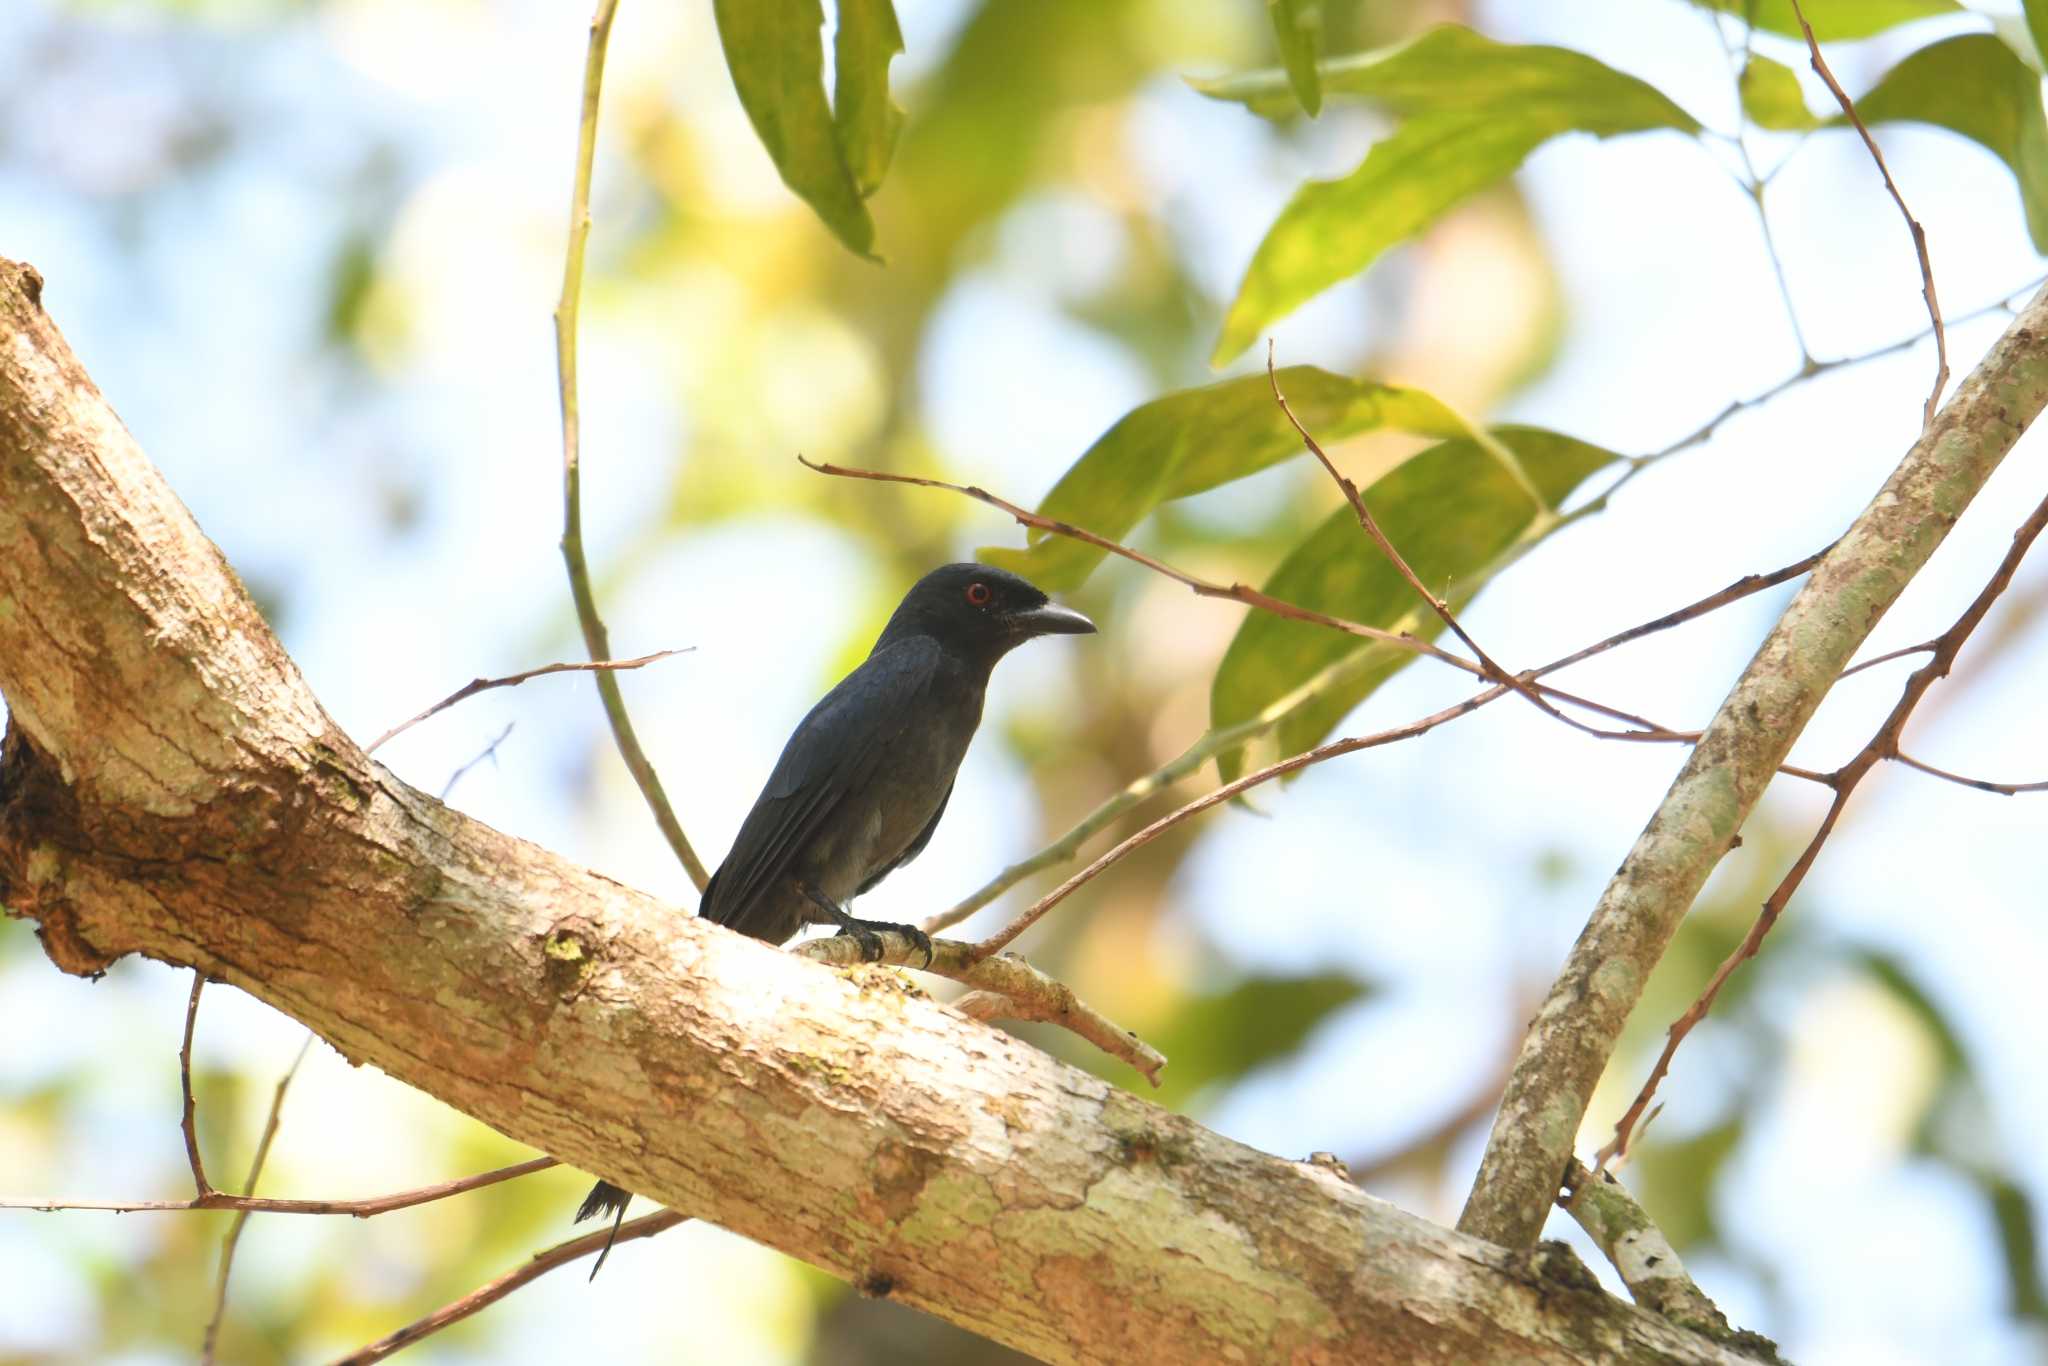 Photo of Crow-billed Drongo at パンガーマングローブ林研究センター by あひる